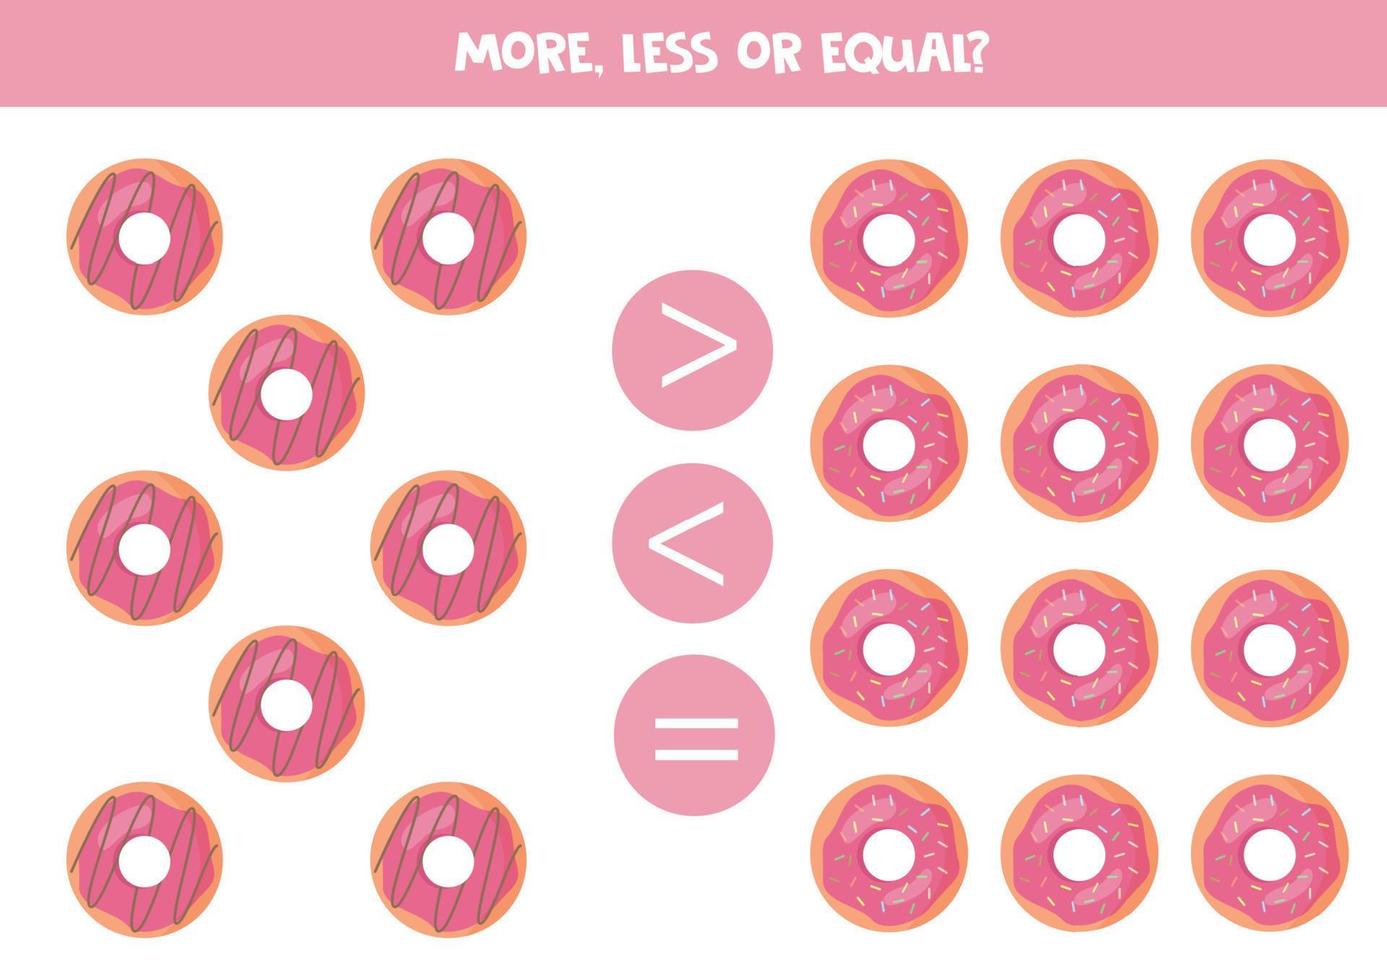 More, less or equal with cartoon pink doughnuts. vector